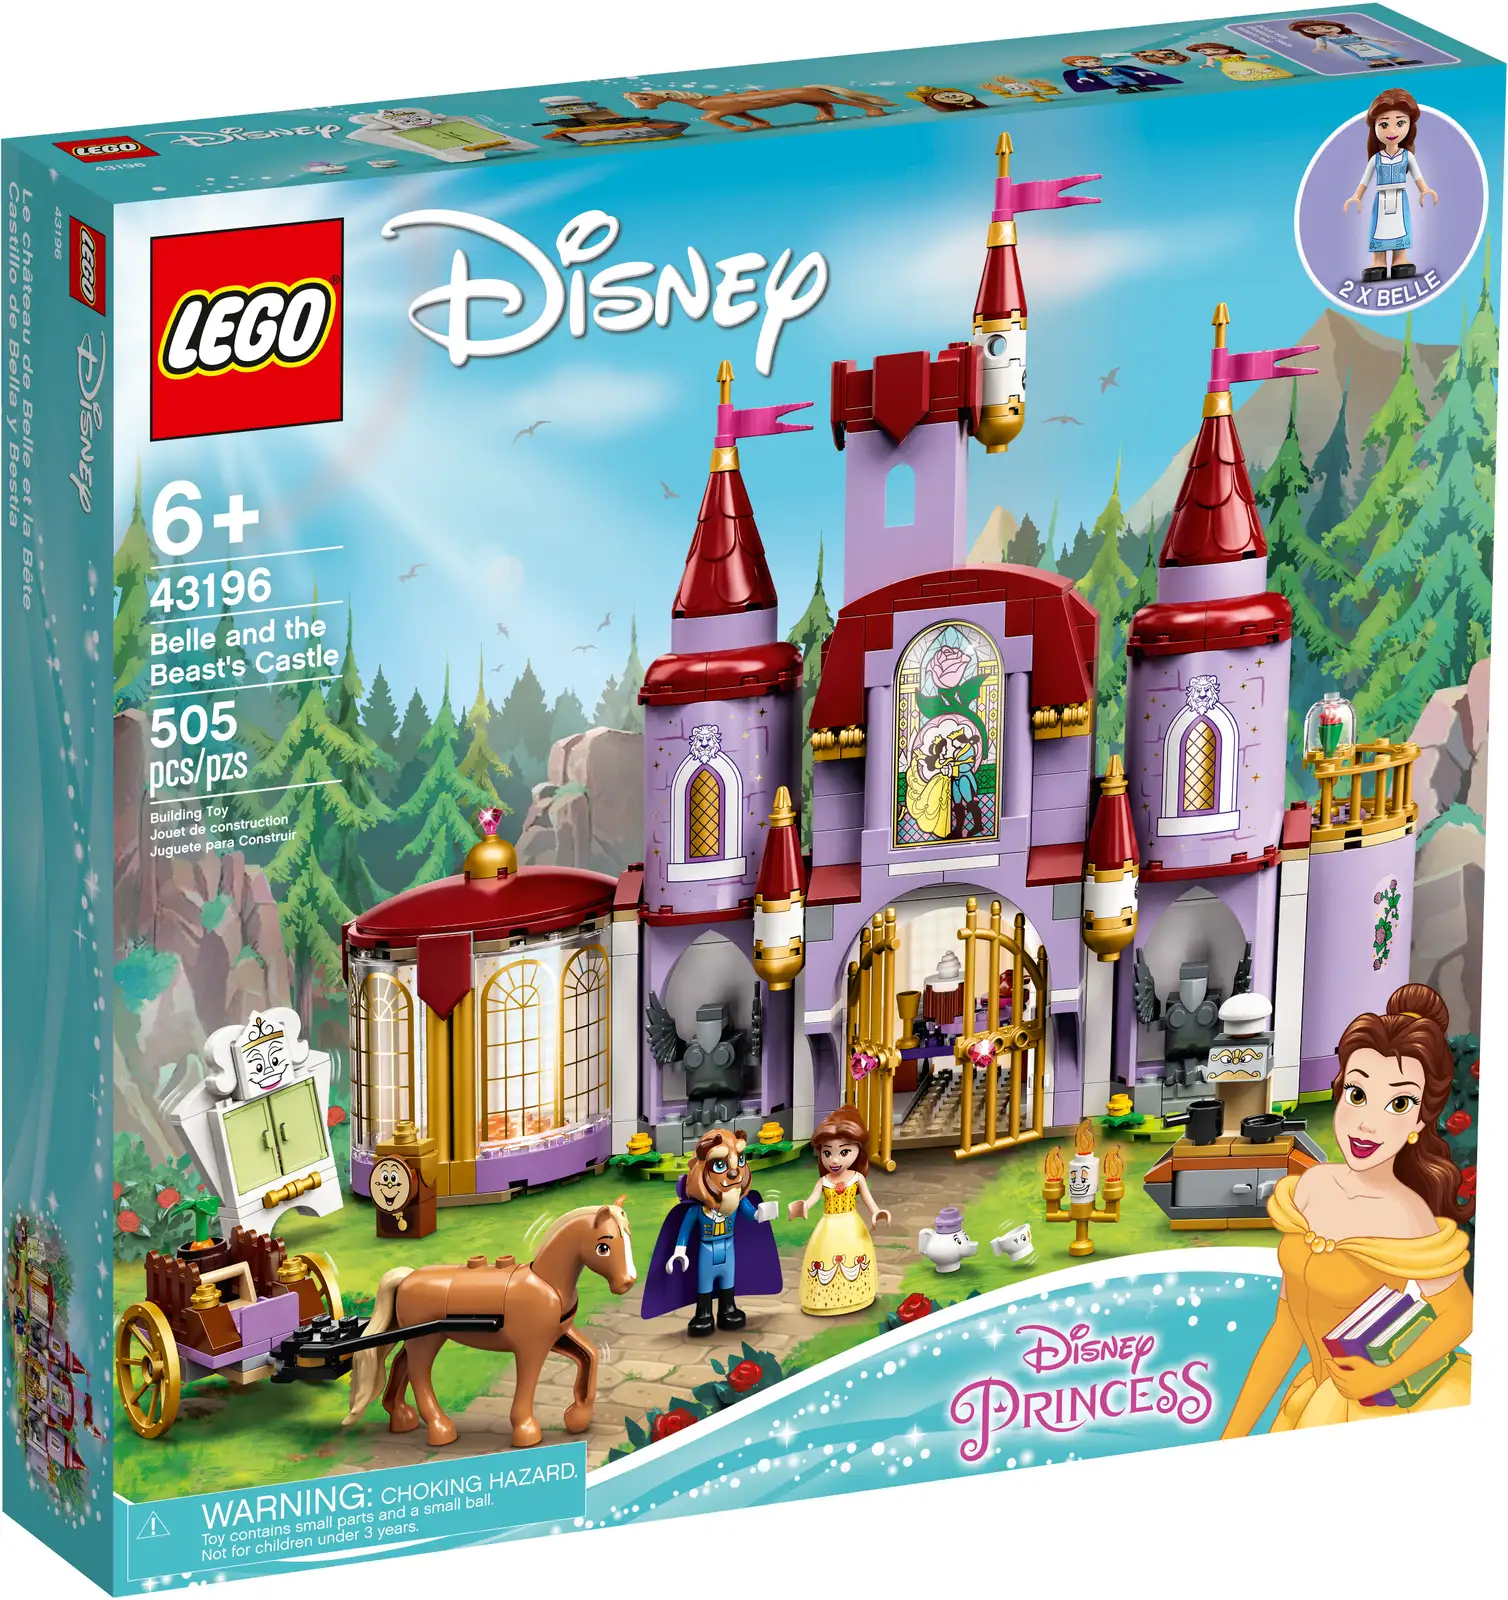 Magic and mystery await Disney’s Beauty and the Beast fans with this detailed LEGO® ǀ Disney Belle and the Beast’s Castle (43196) set. In addition to the castle, this set comes with printed picture instructions and digital Instructions PLUS. Using the LEGO Building Instructions app lets even younger builders feel like real master builders… awesome! Wonderful characters start the play This detailed set comes with Disney’s Beast (remove the Beast head to transform him into the Prince) and 2 Belle mini-doll figures, plus Philippe the horse, who Belle can ride, and 6 other well-known Beauty and the Beast LEGO figures. The set features several fun play starters that inspire kids to dive into their own imaginative world of magic and adventure. Exciting role-play fun Kids can play out their Disney Princess fantasies with this buildable toy set. The castle can be used on its own or with other LEGO sets for more fun story options. It makes a perfect on-trend gift or unique present for a young fan. Inspire magical, creative play with this amazing LEGO® ǀ Disney Belle and the Beast’s Castle (43196) set, a great treat for kids and fans of Disney’s Beauty and the Beast. Create a 2-story castle with a spinning dance floor, rotating closet, 3 mini-doll figures (including 2 versions of Belle and a Beast head for the Prince), Philippe the horse and 6 other LEGO® figures. This cool LEGO® ǀ Disney set is loaded with accessories, including a ripped portrait of the Prince and an enchanted rose. Perfect for playing out favorite movie scenes or open-ended role-play fun. Any fan of Disney’s Beauty and the Beast will love this set. The castle is full of known and unexpected details, making an exciting and unique construction toy gift for boys and girls aged 6 and up. With the castle measuring over 10.5 in. (27 cm) high and 12.5 in. (32 cm) wide, this set is both gorgeous to look at and perfect for encouraging lots of creative role-play fun. Printed building instructions are great but digital Instructions PLUS are awesome! Using the LEGO® Building Instructions app, even younger builders can zoom in on and visualize models as they build. Give youngsters great characters and scenes to play out with LEGO® ǀ Disney sets. This fun building toy offers story starters that help build children’s creativity and imagination skills. LEGO® components meet rigorous industry standards to ensure they are consistent, compatible and connect and pull apart reliably every time – it’s been that way since 1958. LEGO® components are dropped, heated, crushed, twisted and analyzed to make sure they meet strict global safety standards.